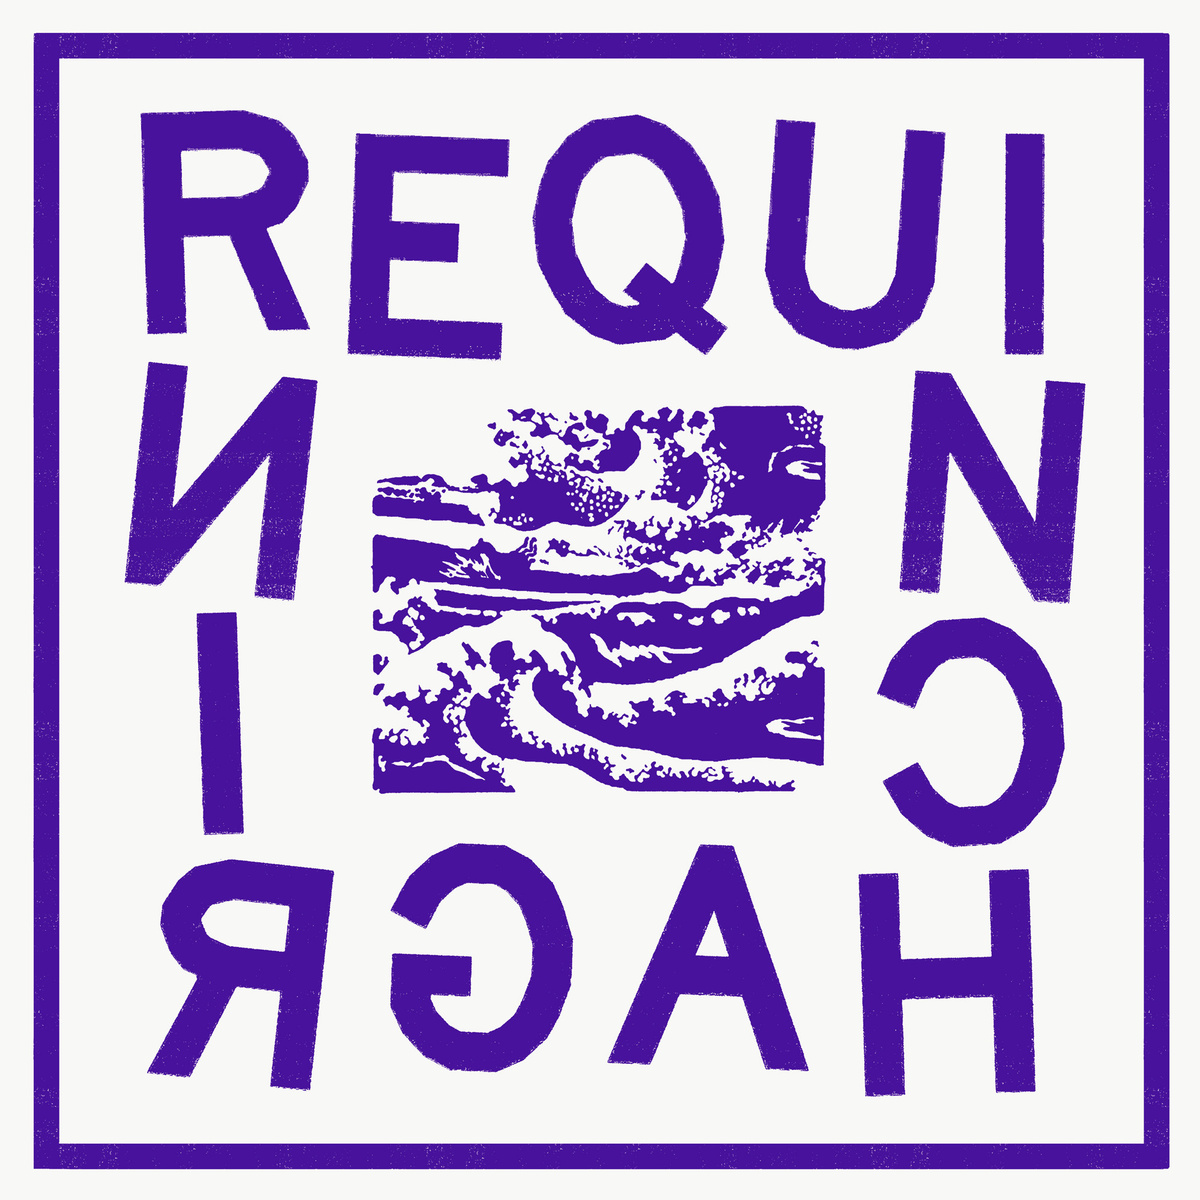 Requin Chagrin - Requin Chagrin